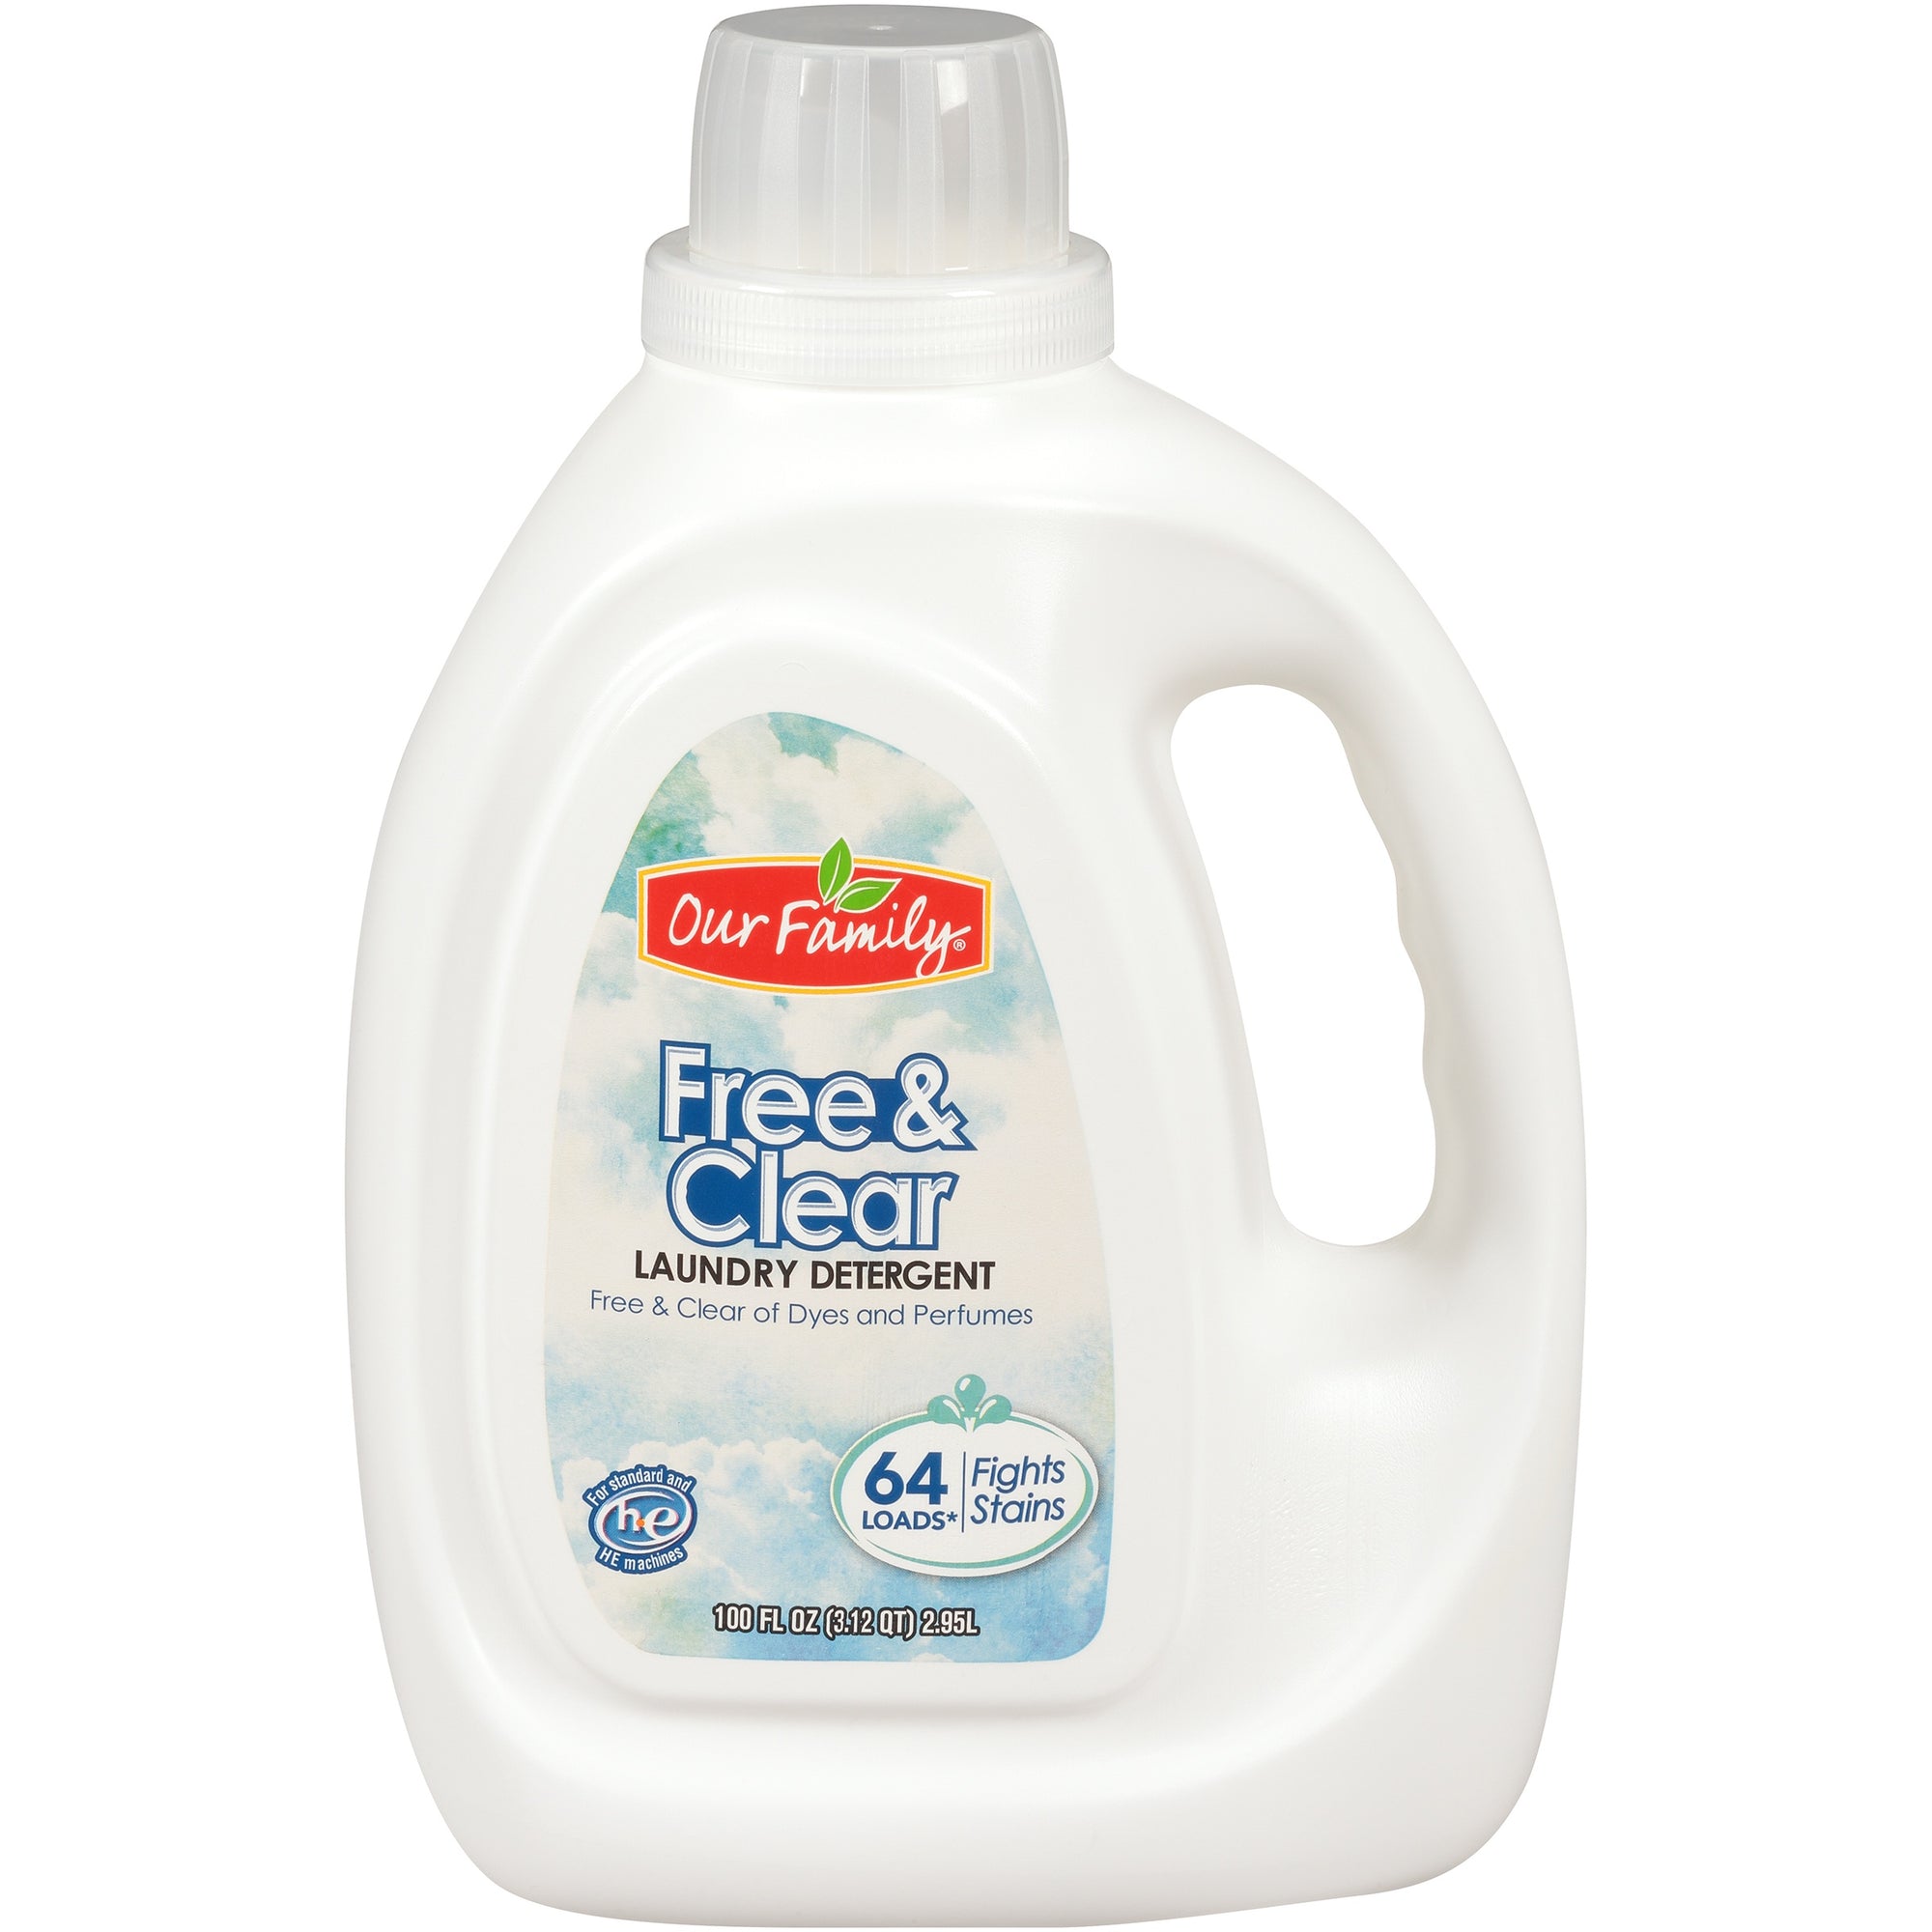 Our Family Laundry Detergent Free & Clear 100oz